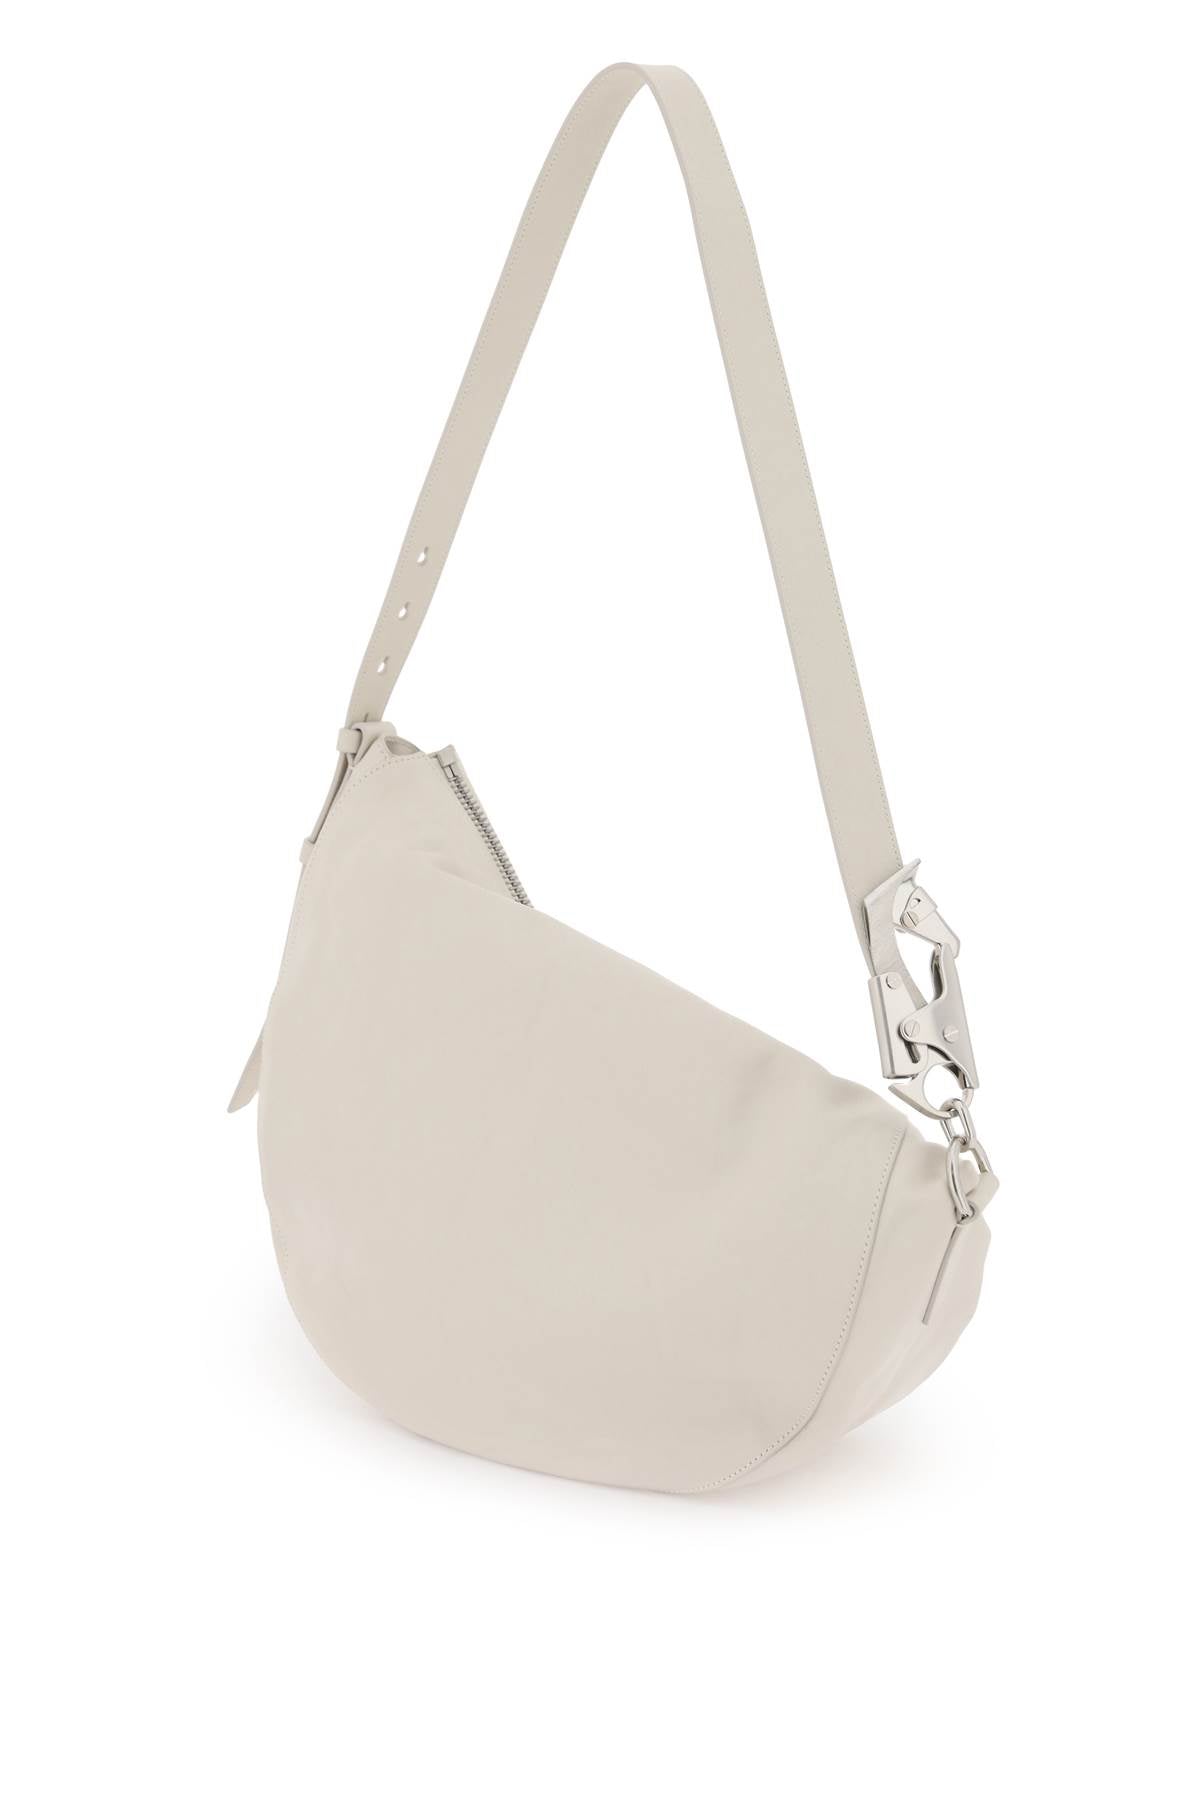 BURBERRY Medium Knight White Grained Leather Crossbody Handbag with Horse Detail and Silver Accents